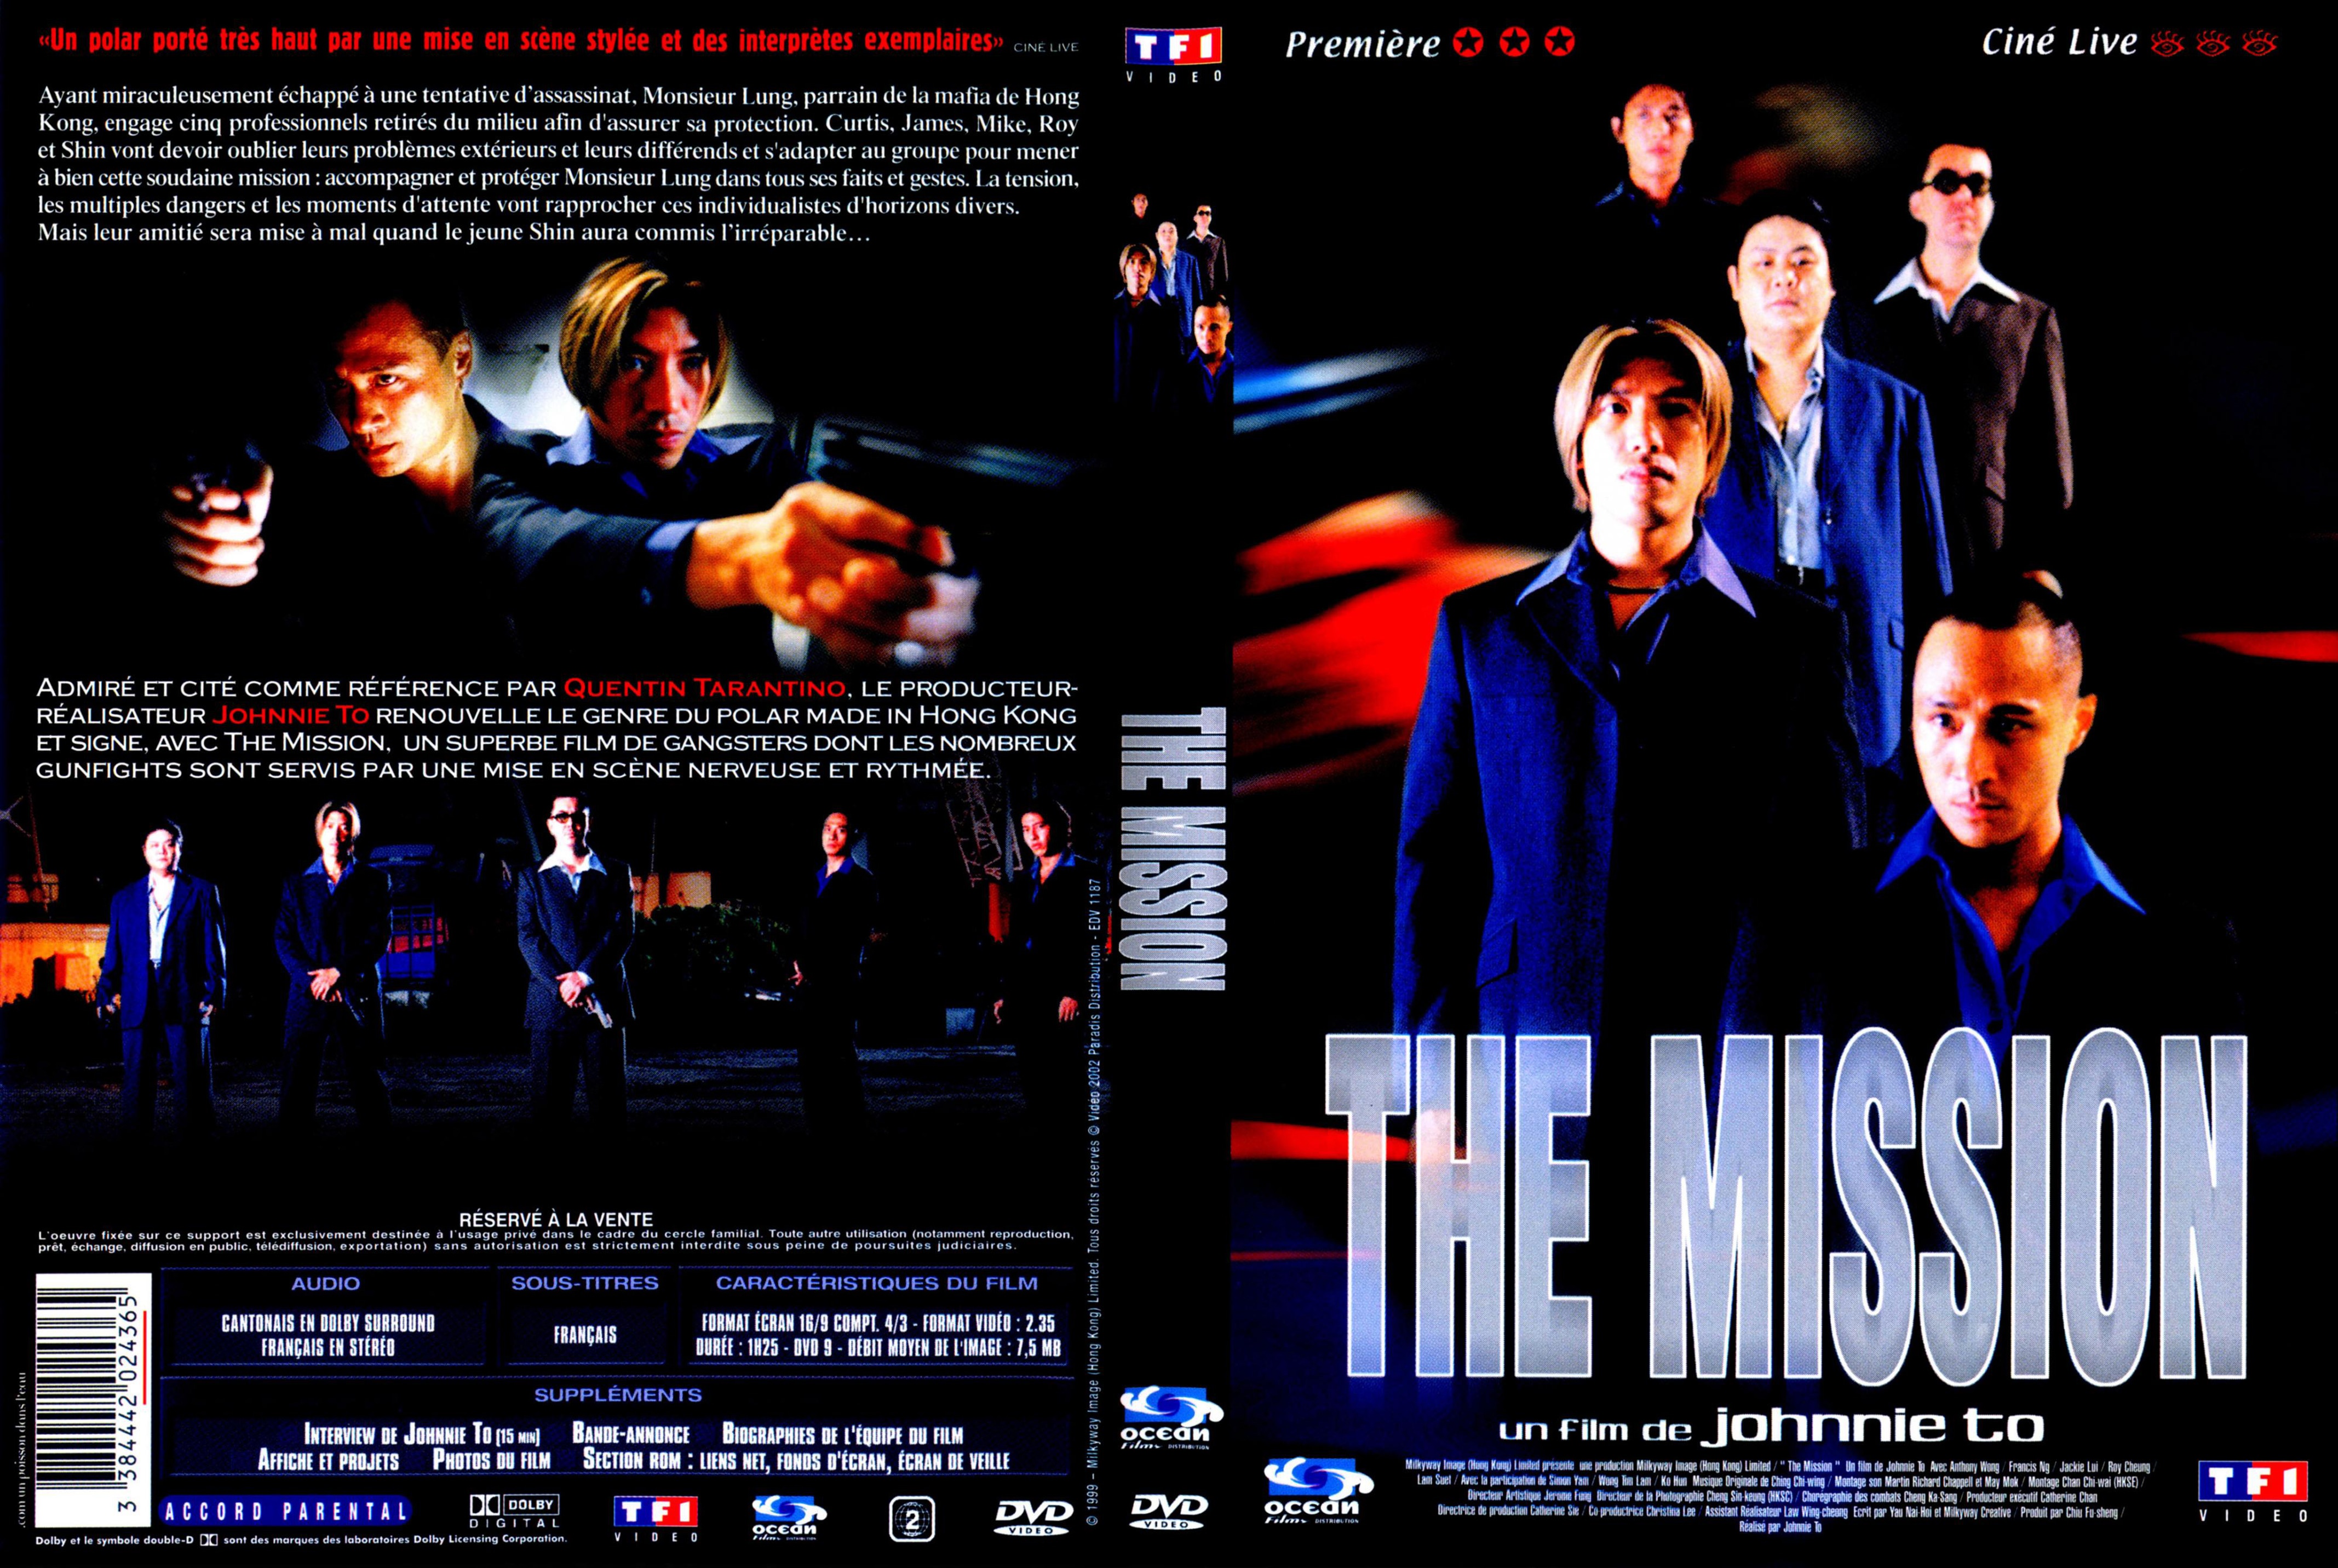 Jaquette DVD The mission